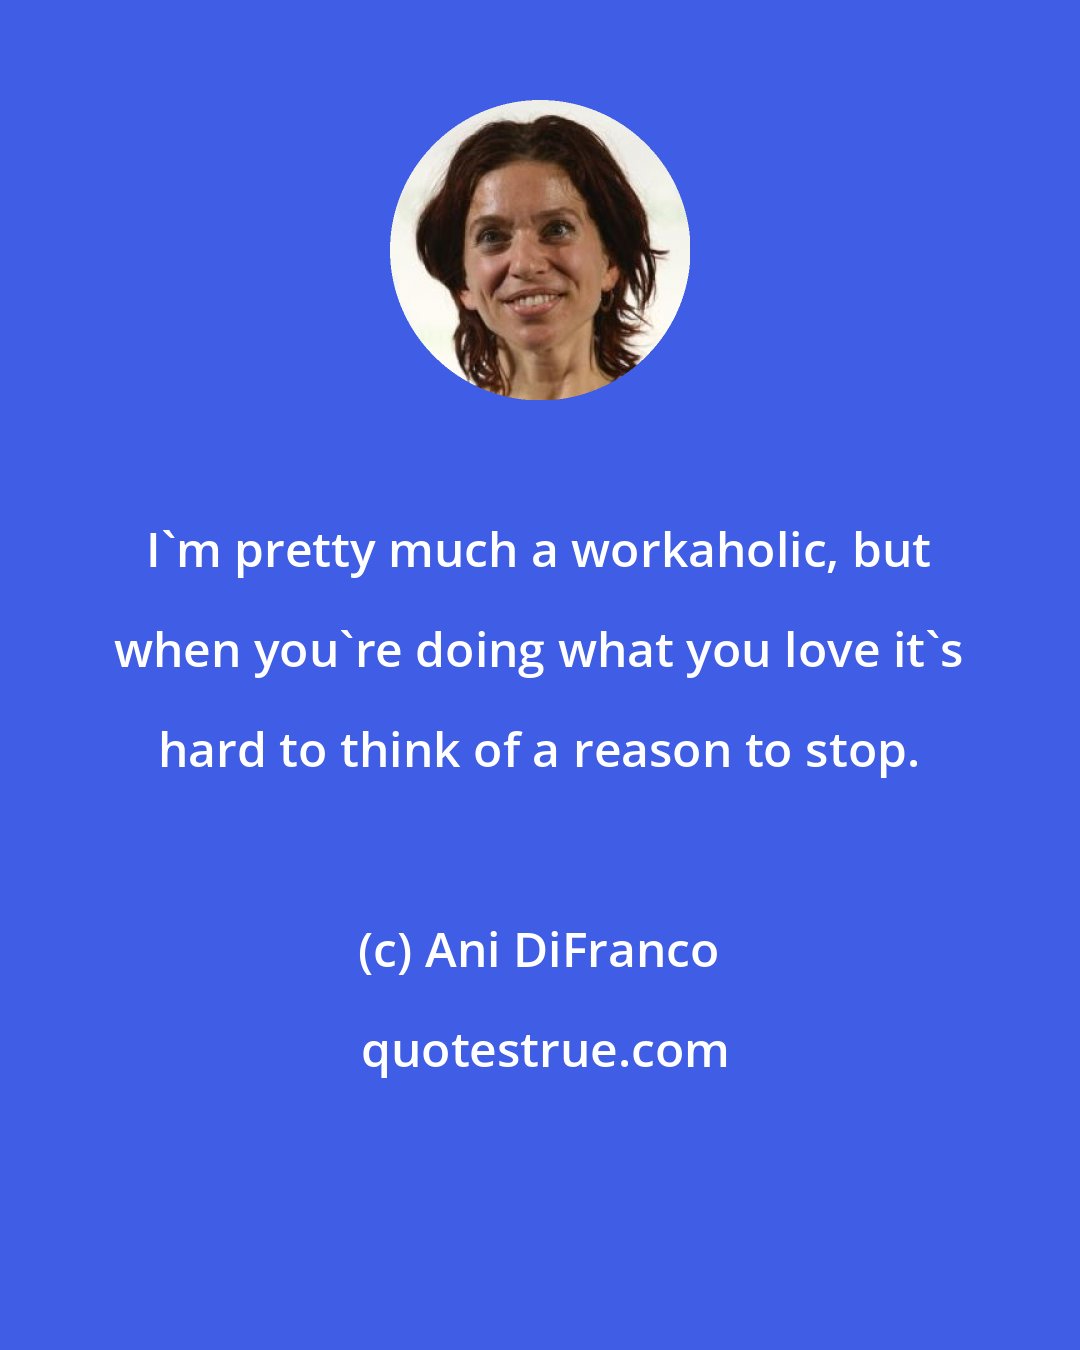 Ani DiFranco: I'm pretty much a workaholic, but when you're doing what you love it's hard to think of a reason to stop.